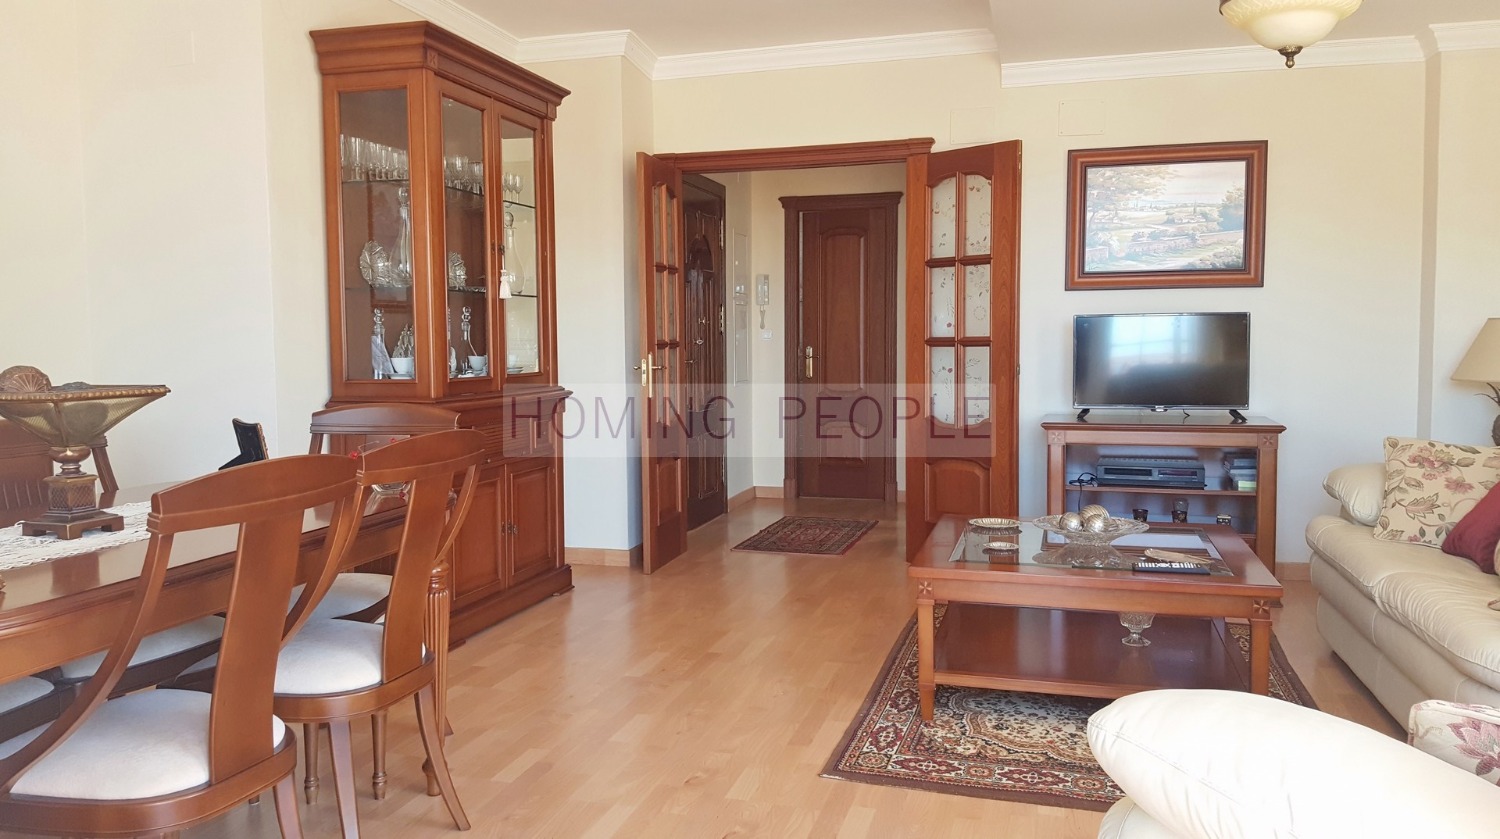 Villa with pool in town, within walking distance to town